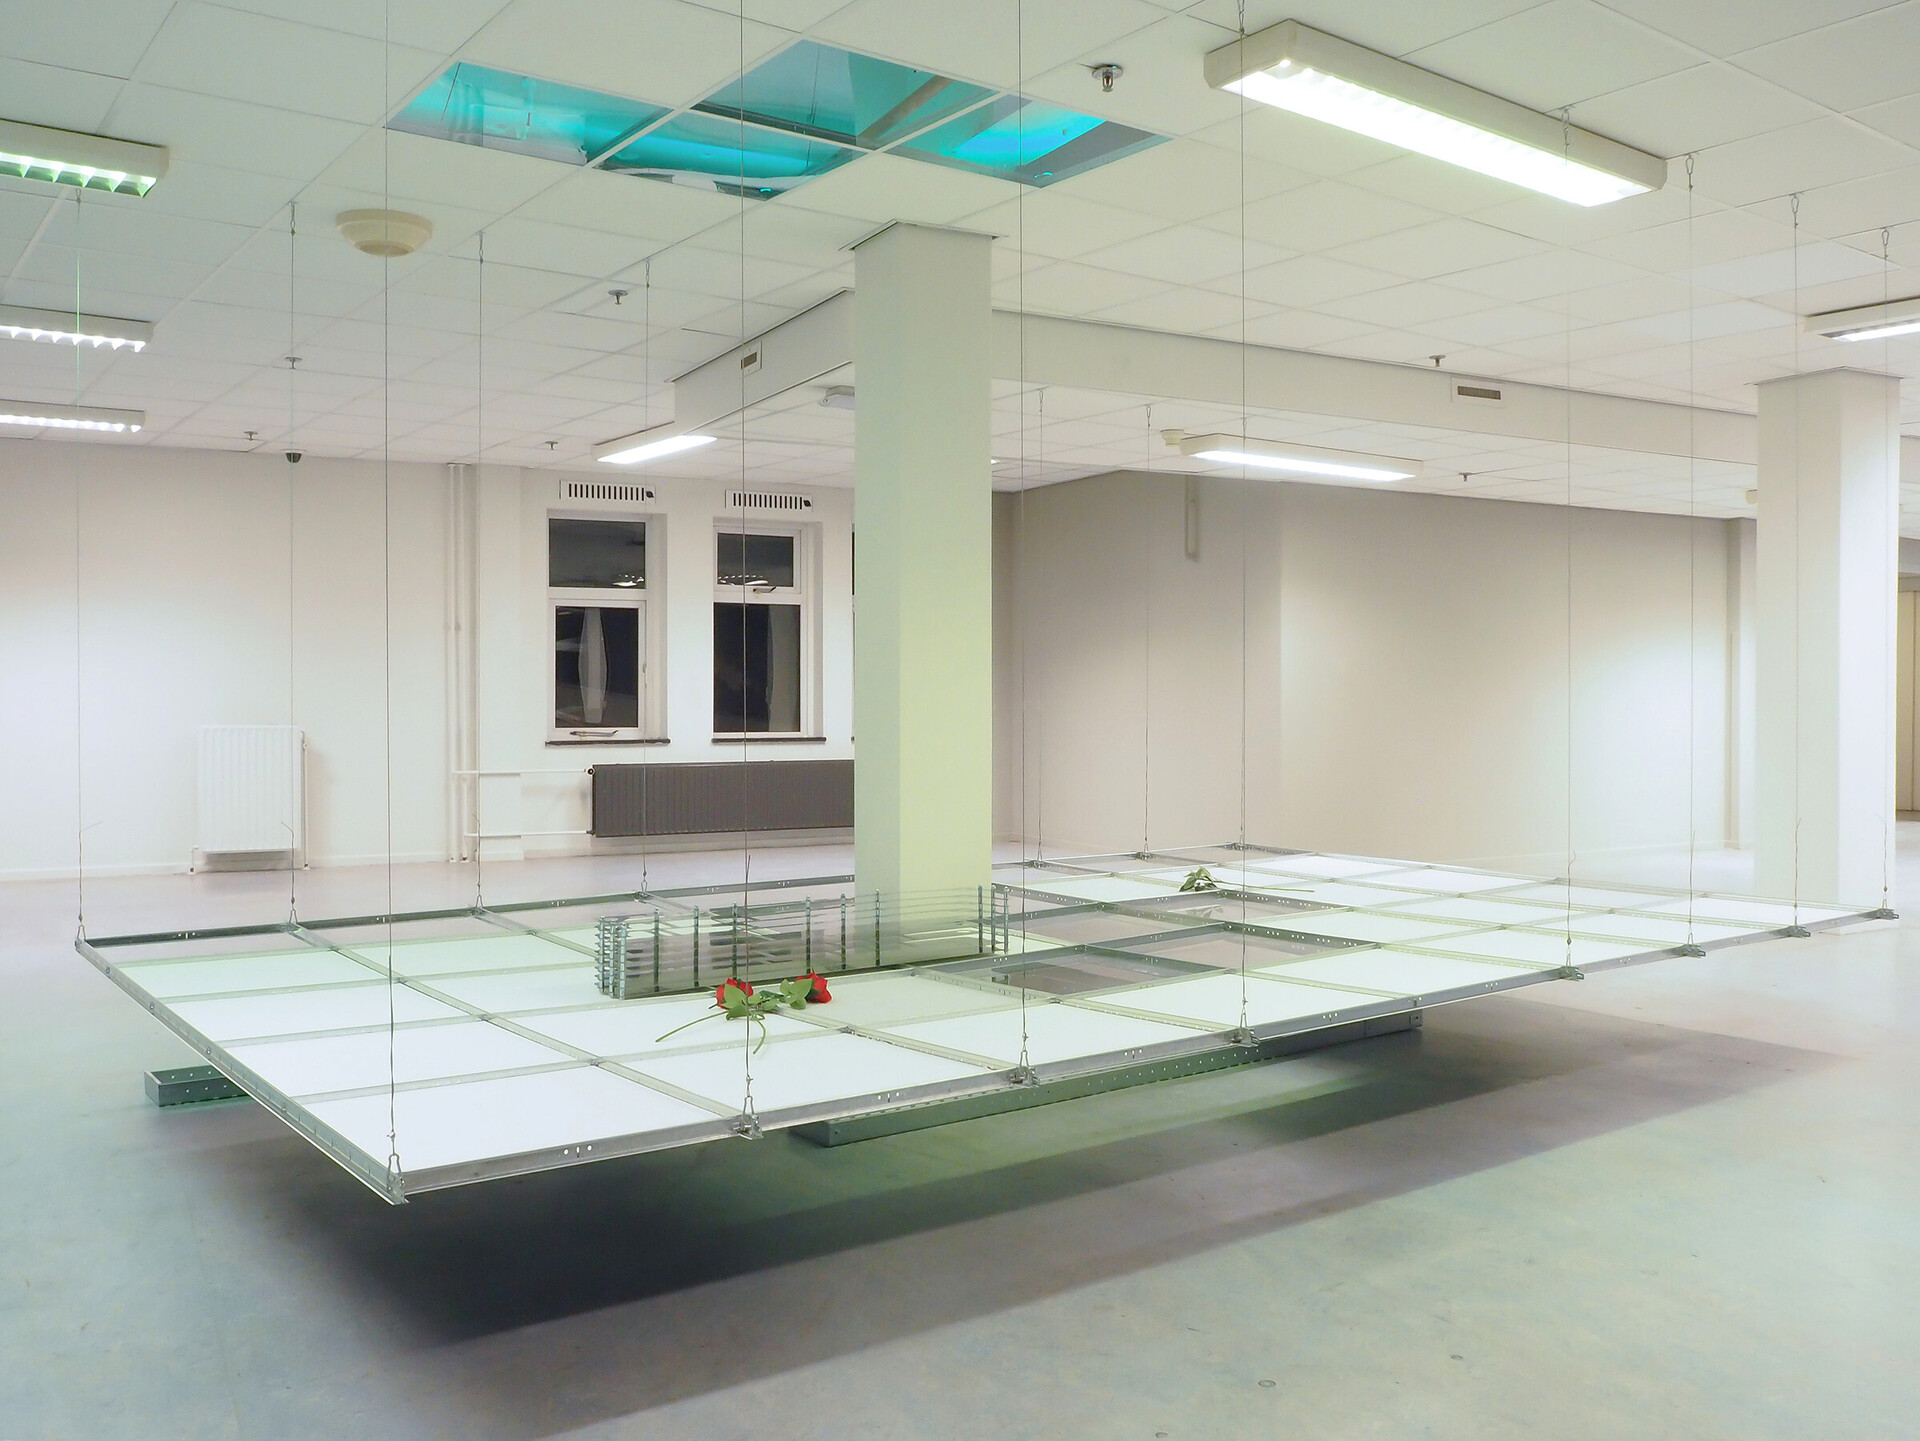 Tom Putman, Dropped Ceiling, 2020, installation view